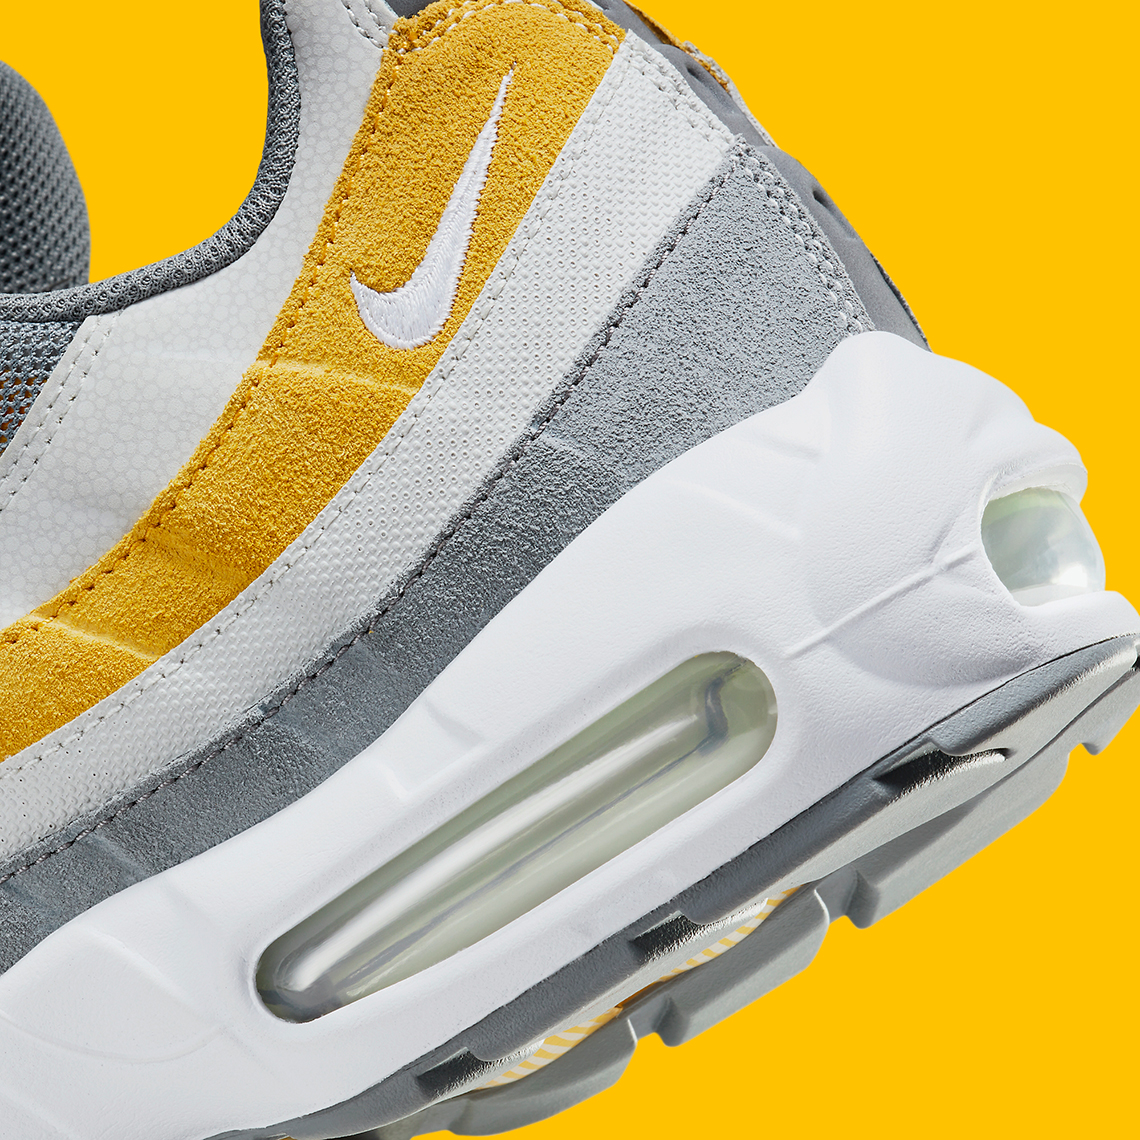 nike tennessee air max 95 grey yellow DM0011 010 2